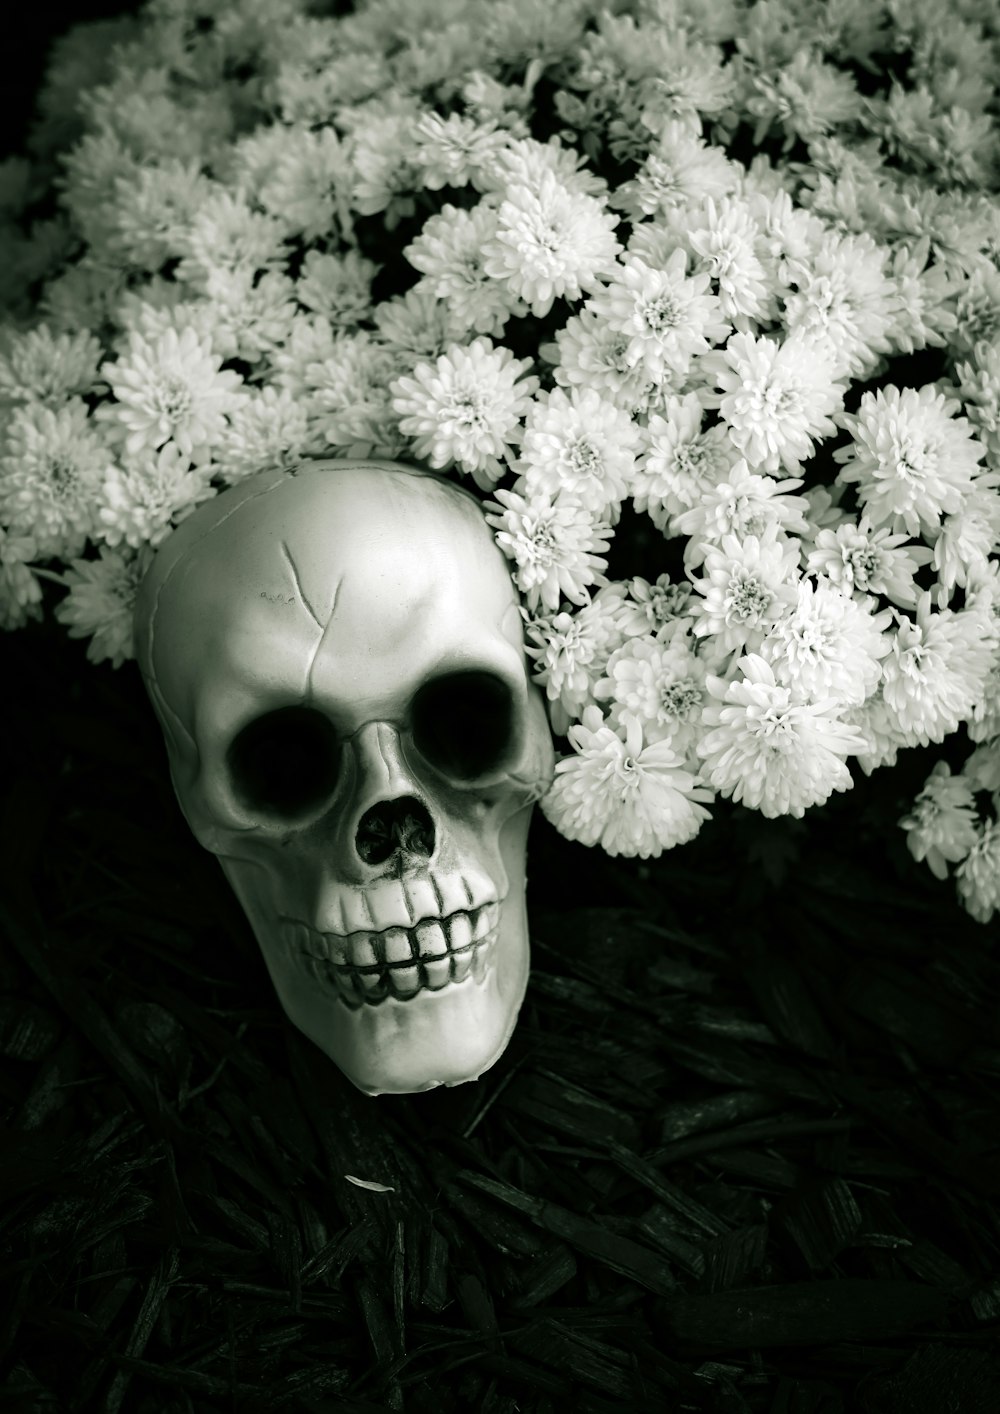 a skull with flowers around it